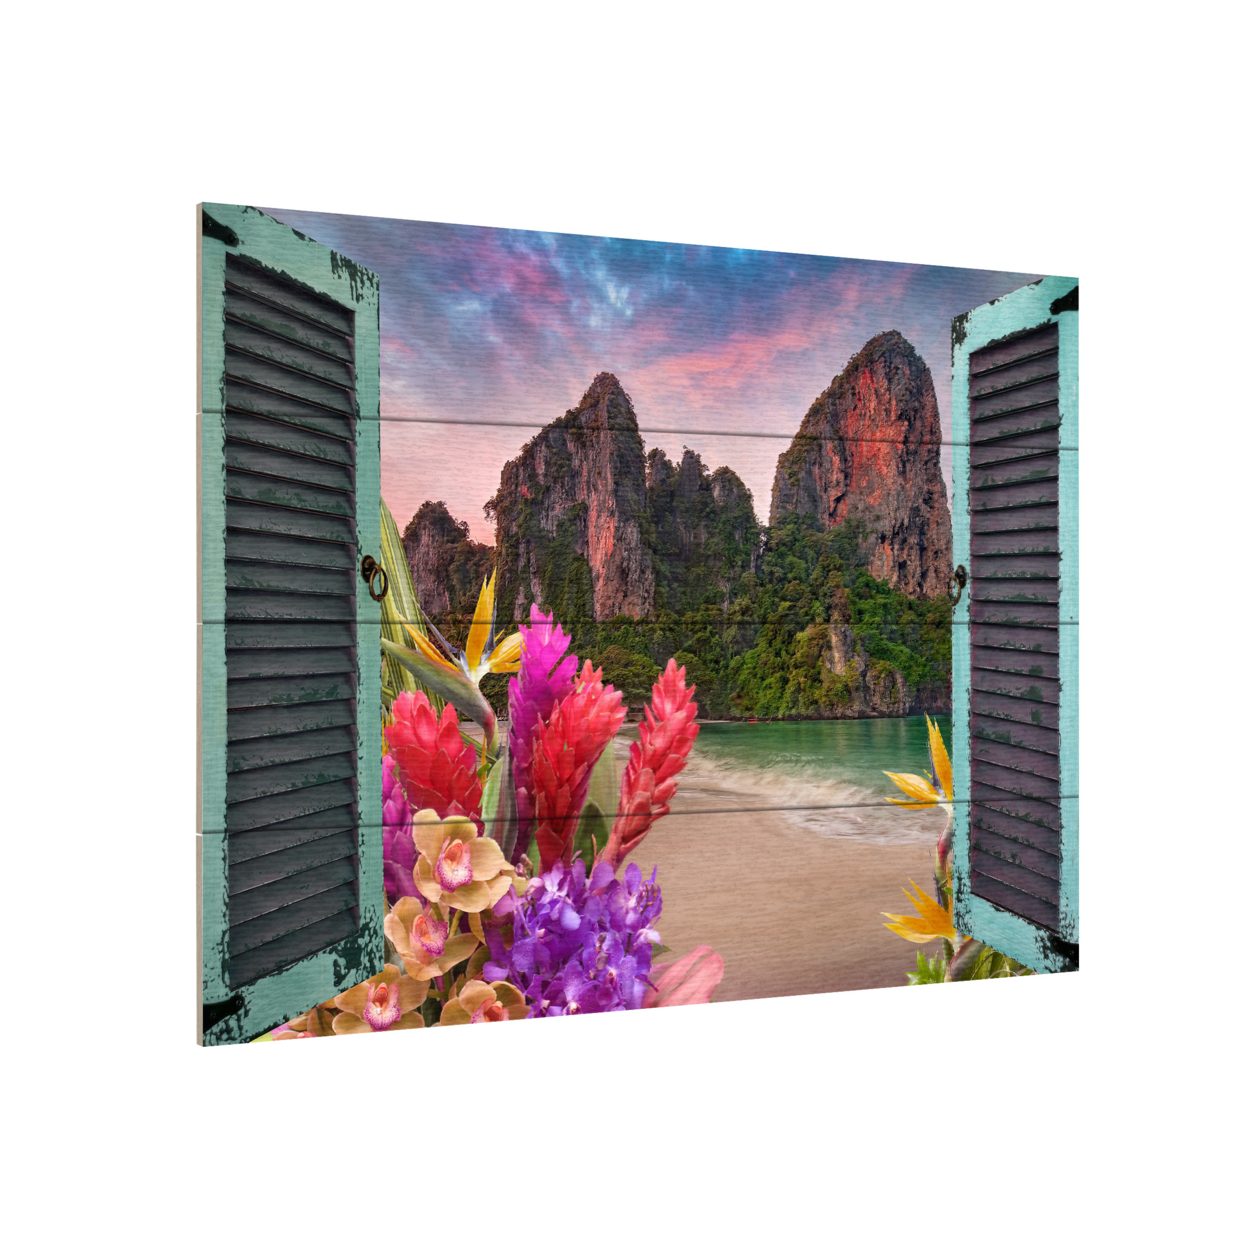 Wall Art 12 X 16 Inches Titled Window To Paradise VI Ready To Hang Printed On Wooden Planks